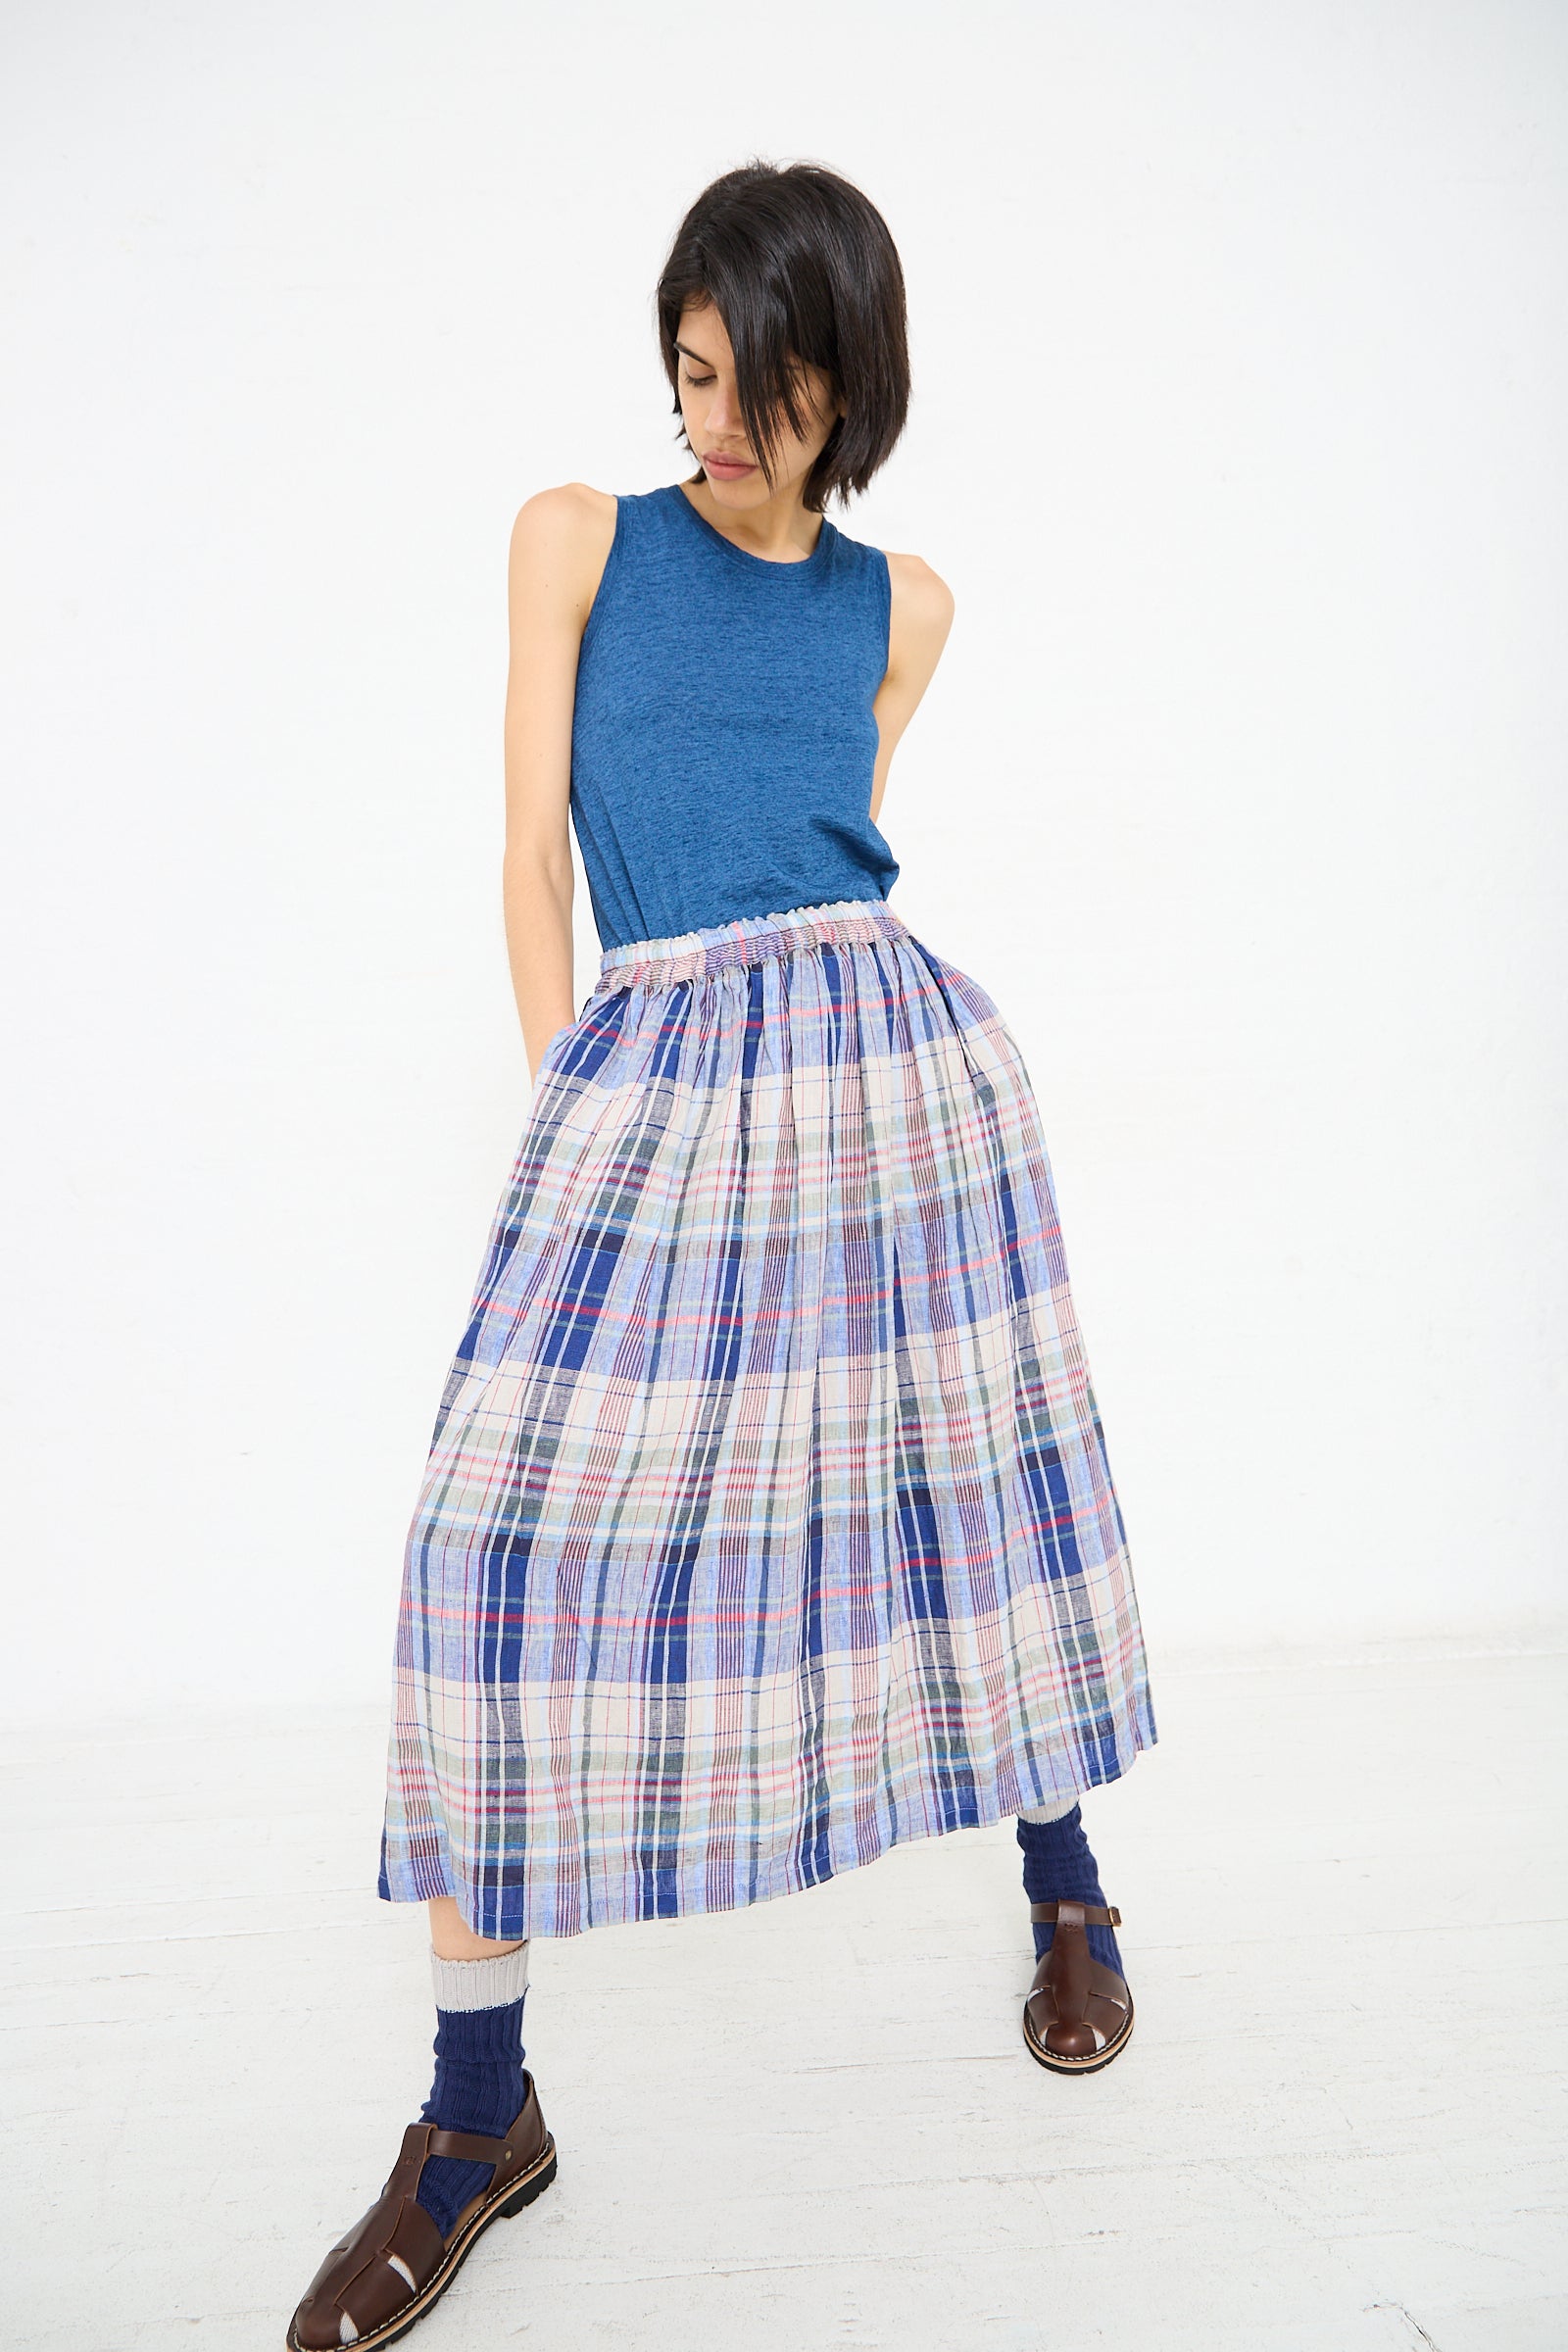 A person stands against a plain background wearing a blue sleeveless top paired with the Linen Check Skirt in Navy by Ichi Antiquités, brown sandals, and blue socks.